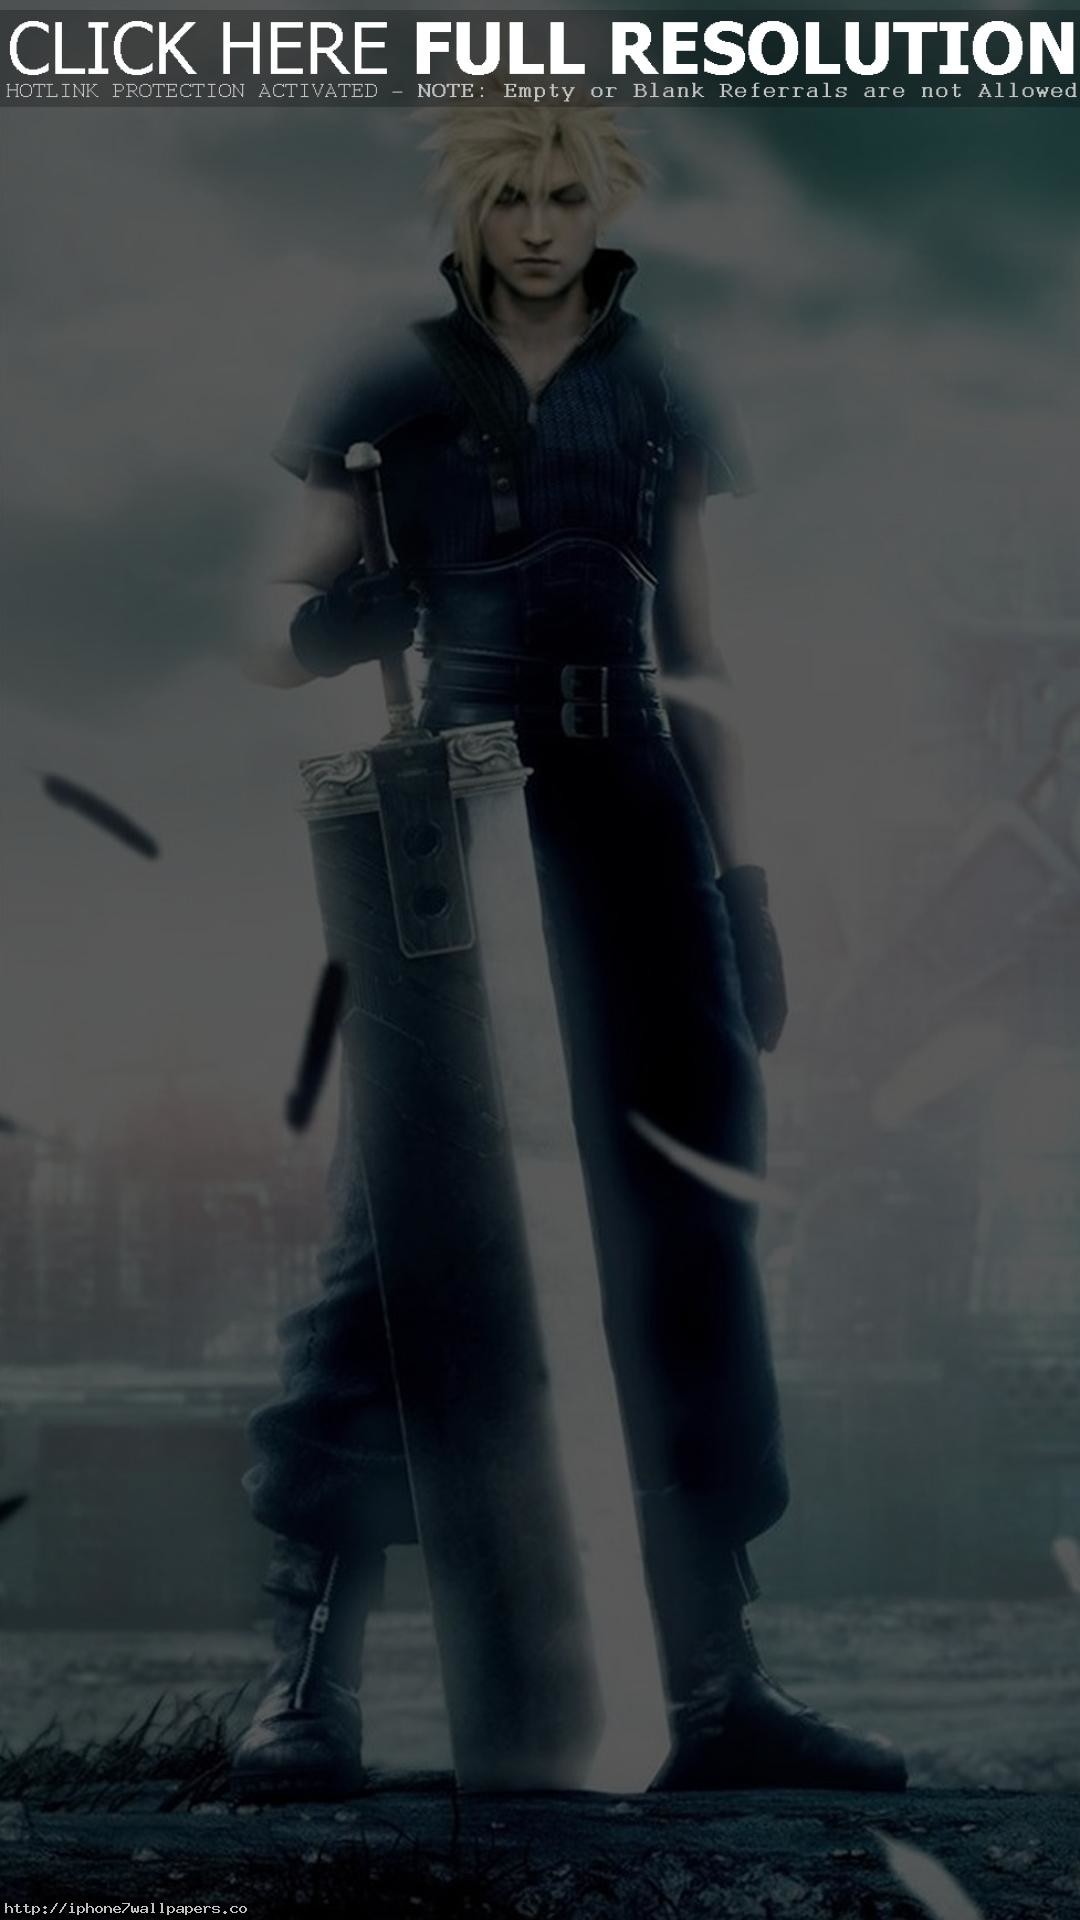 Final Fantasy 7 – Cloud Strife Android wallpaper – Android HD wallpapers